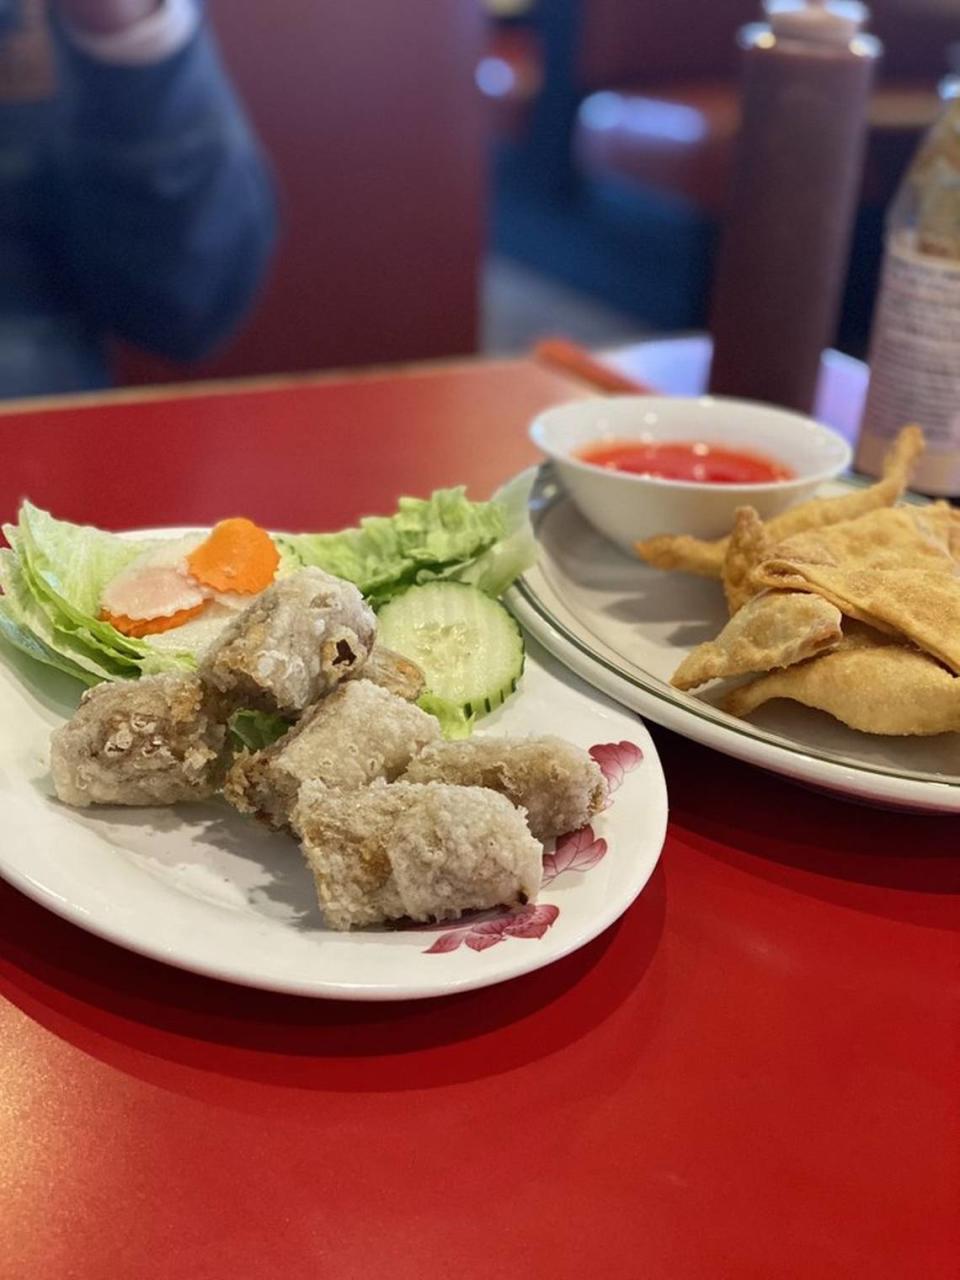 Dong Khanh includes both Vietnamese and Chinese food on its menu.